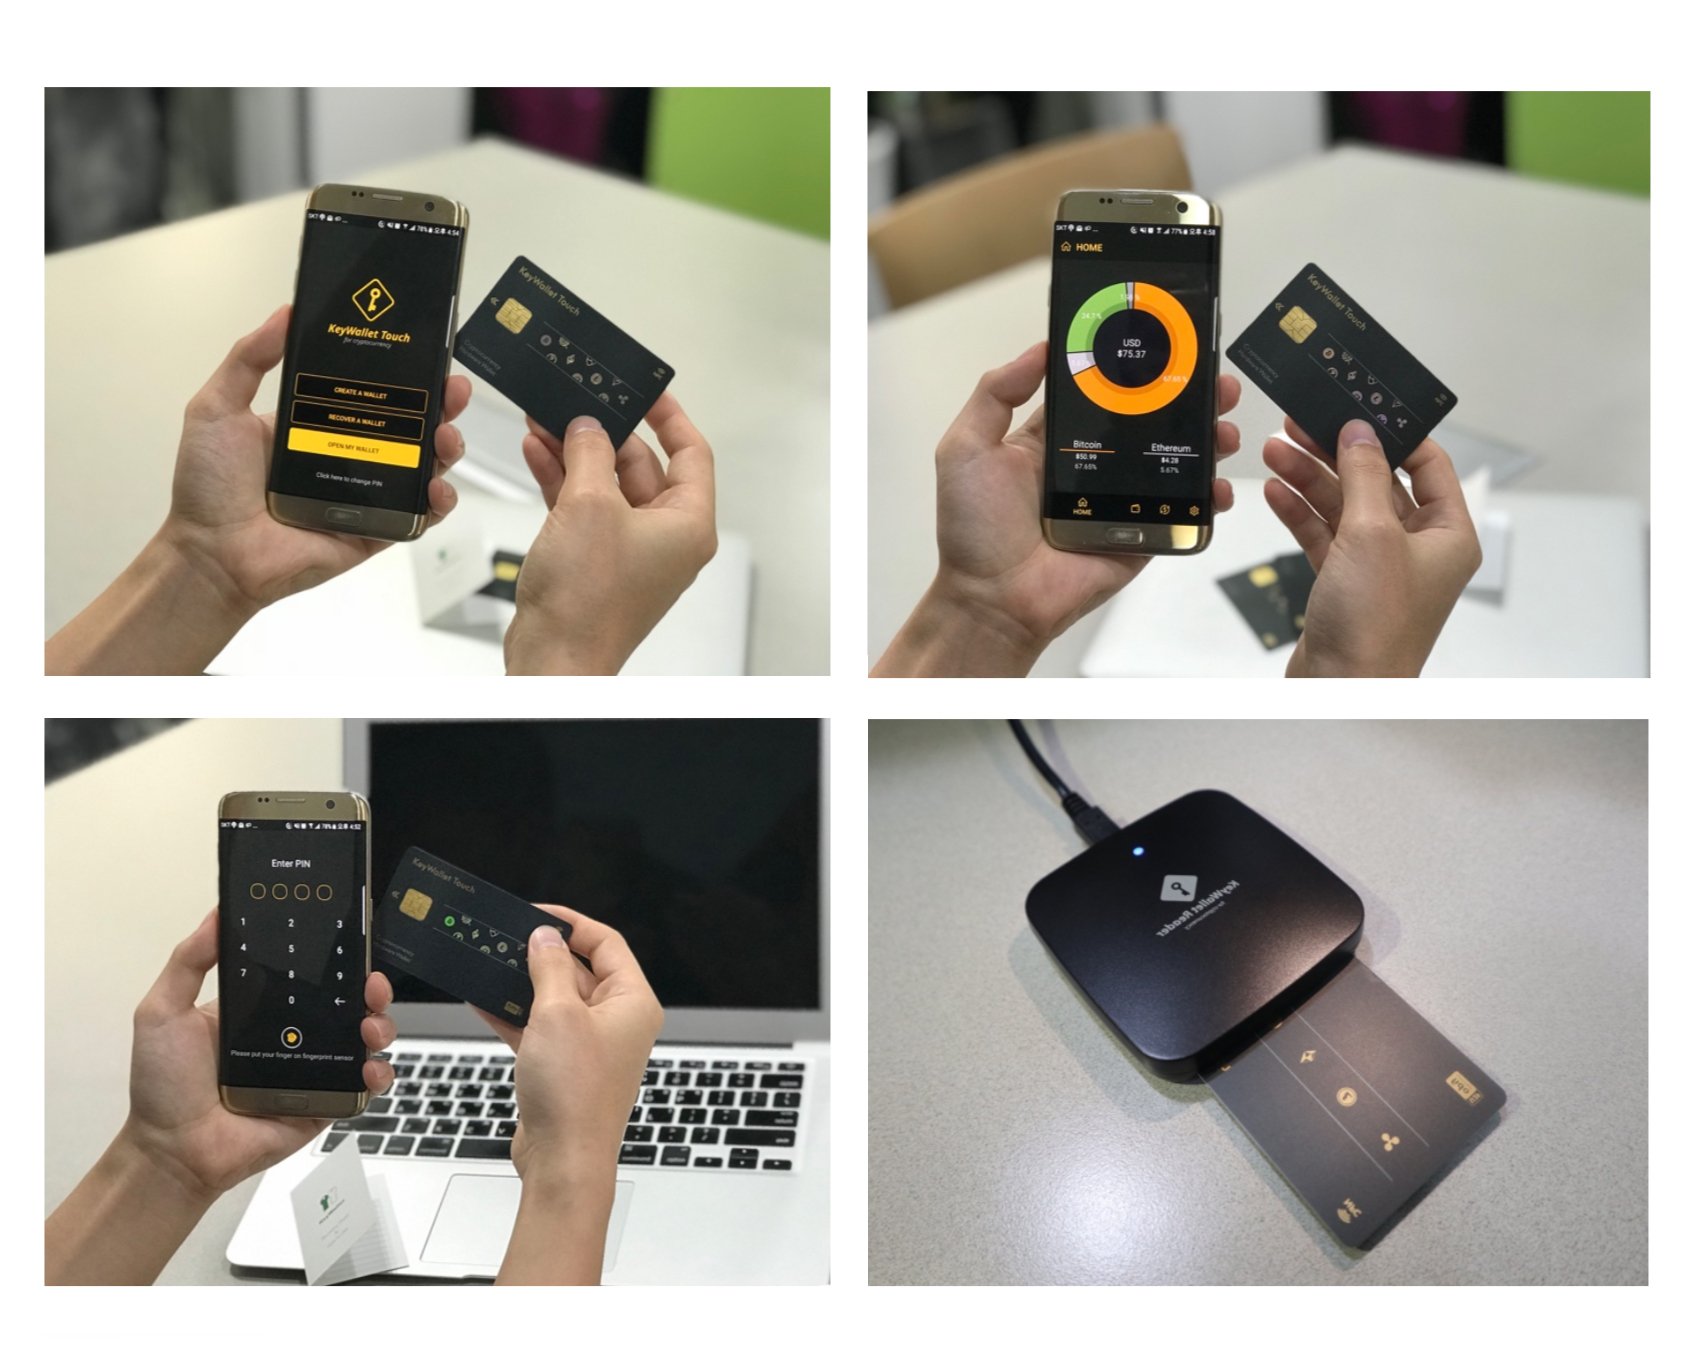 Korean Firm Keypair Launches Credit Card Shaped NFC Hardware Wallet